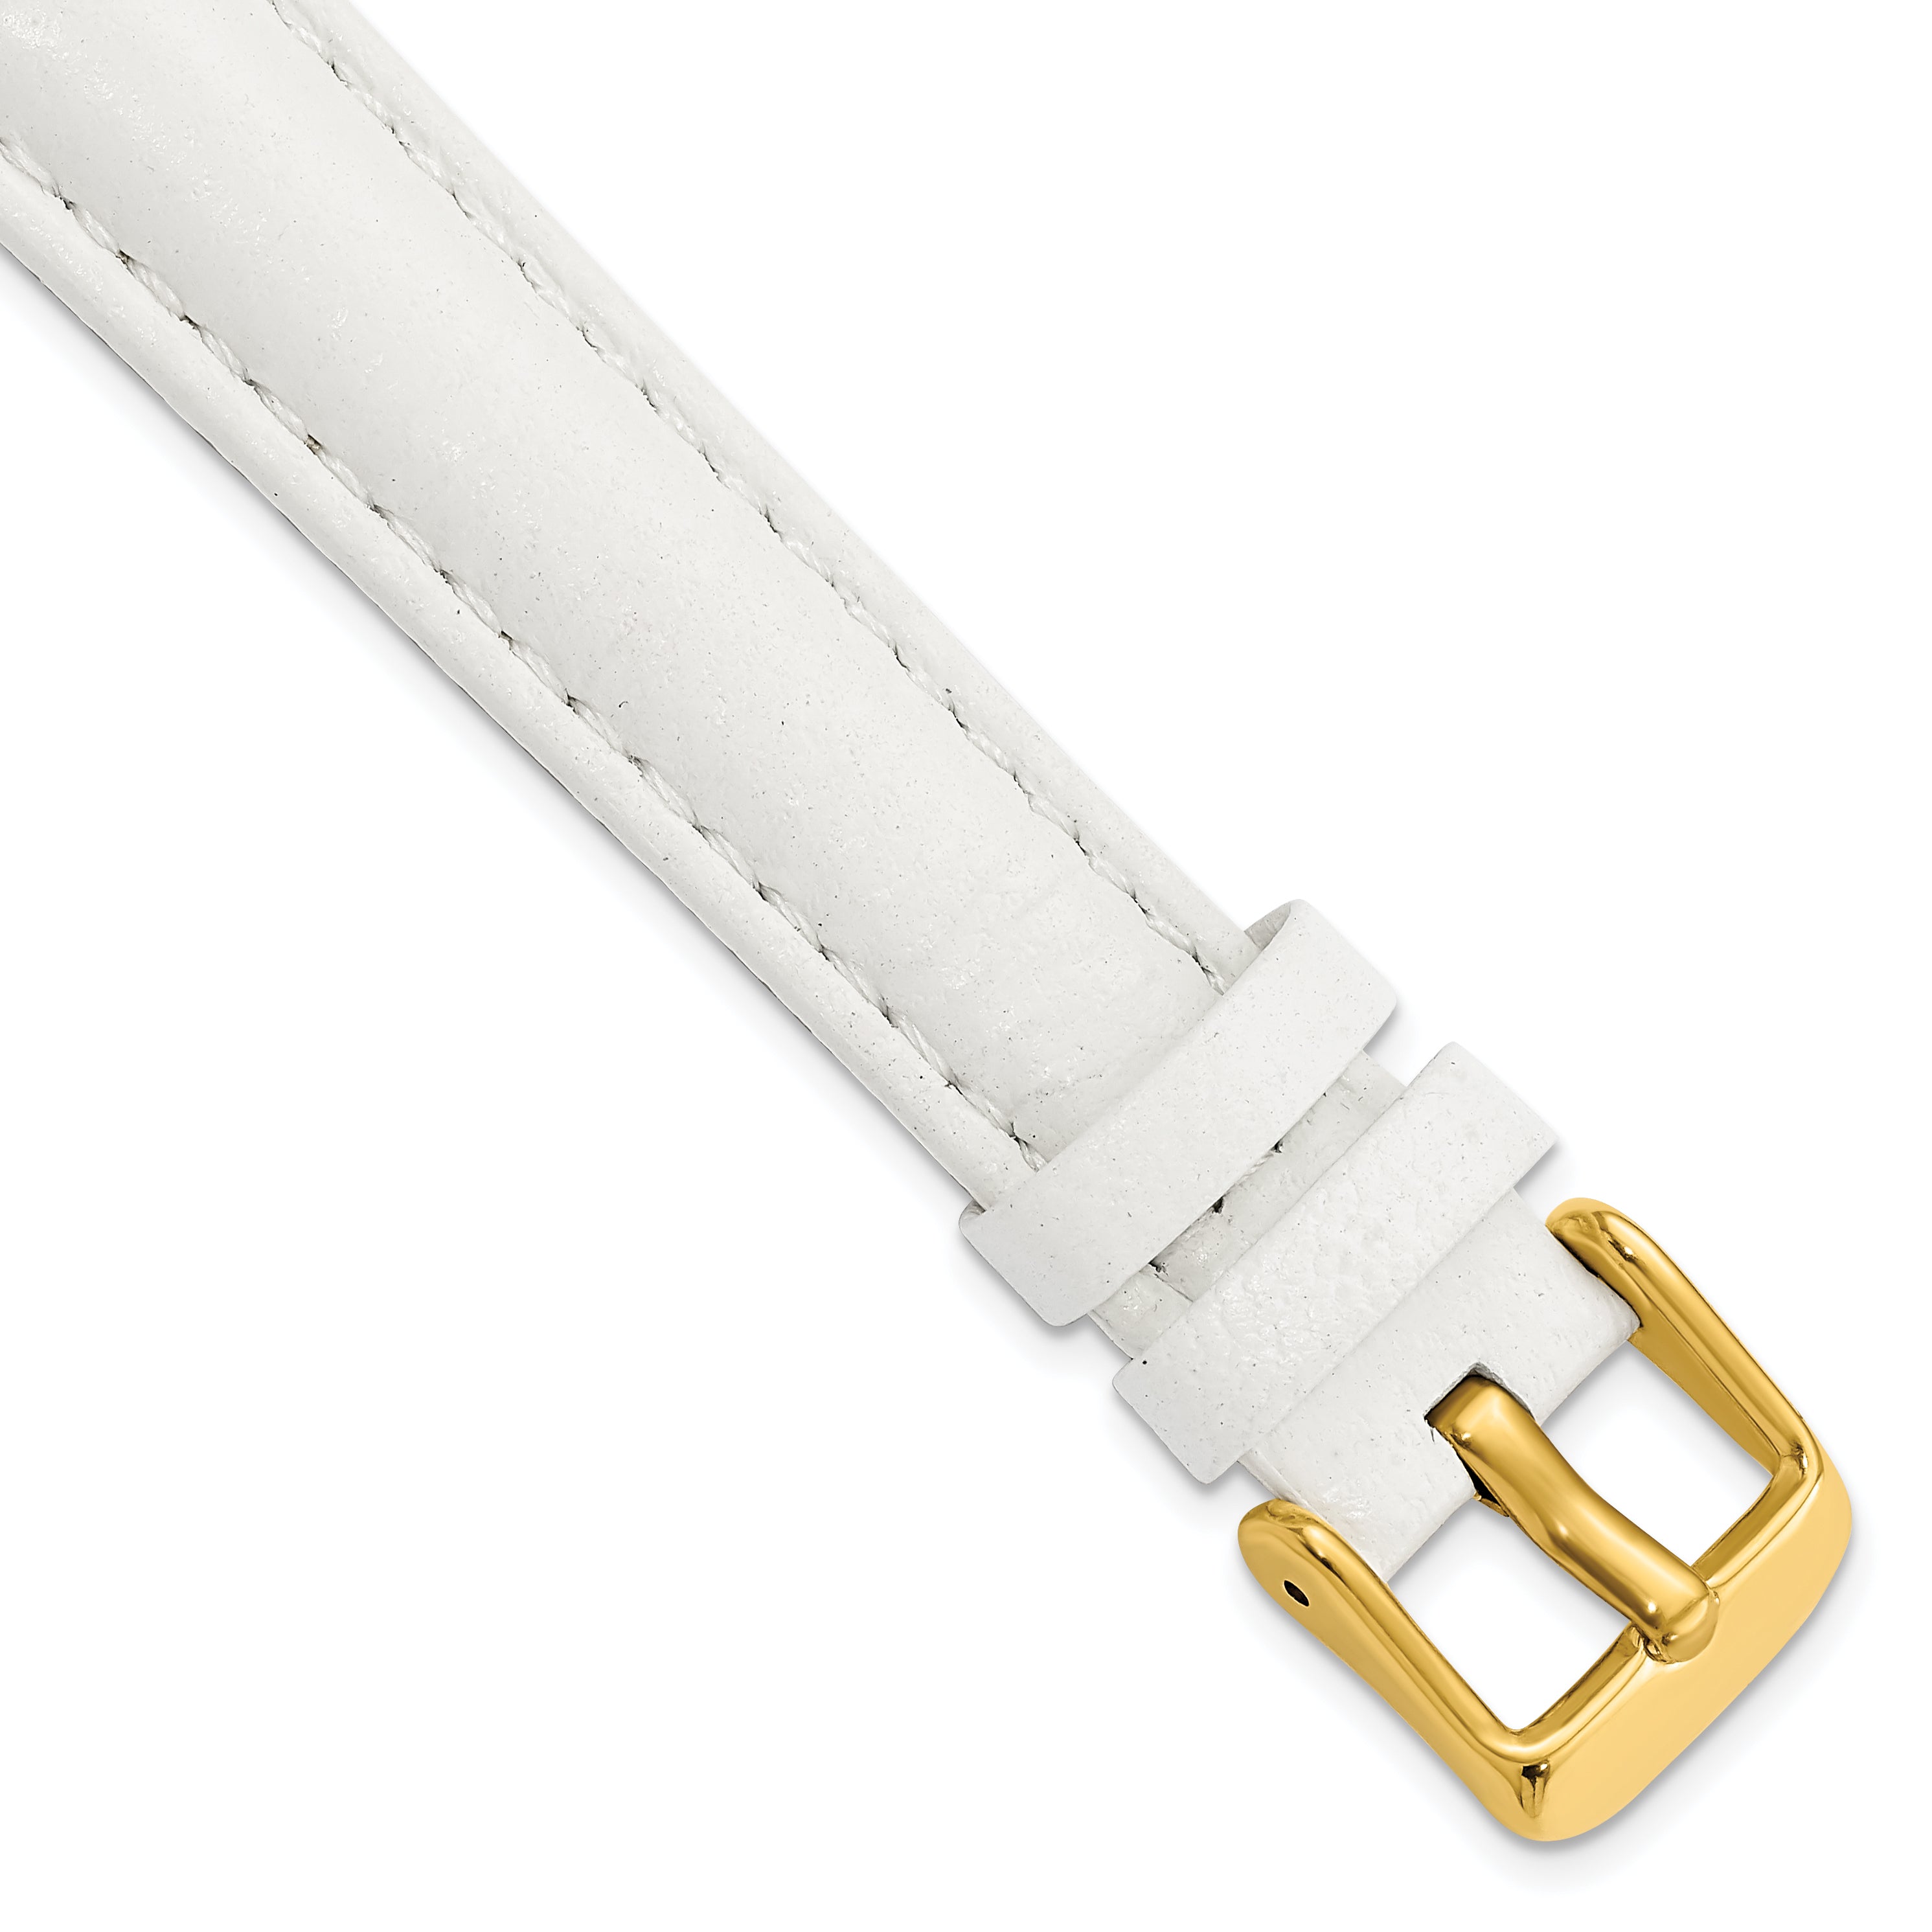 DeBeer 16mm White Glove Leather with Gold-tone Panerai Style Buckle 7.75 inch Watch Band